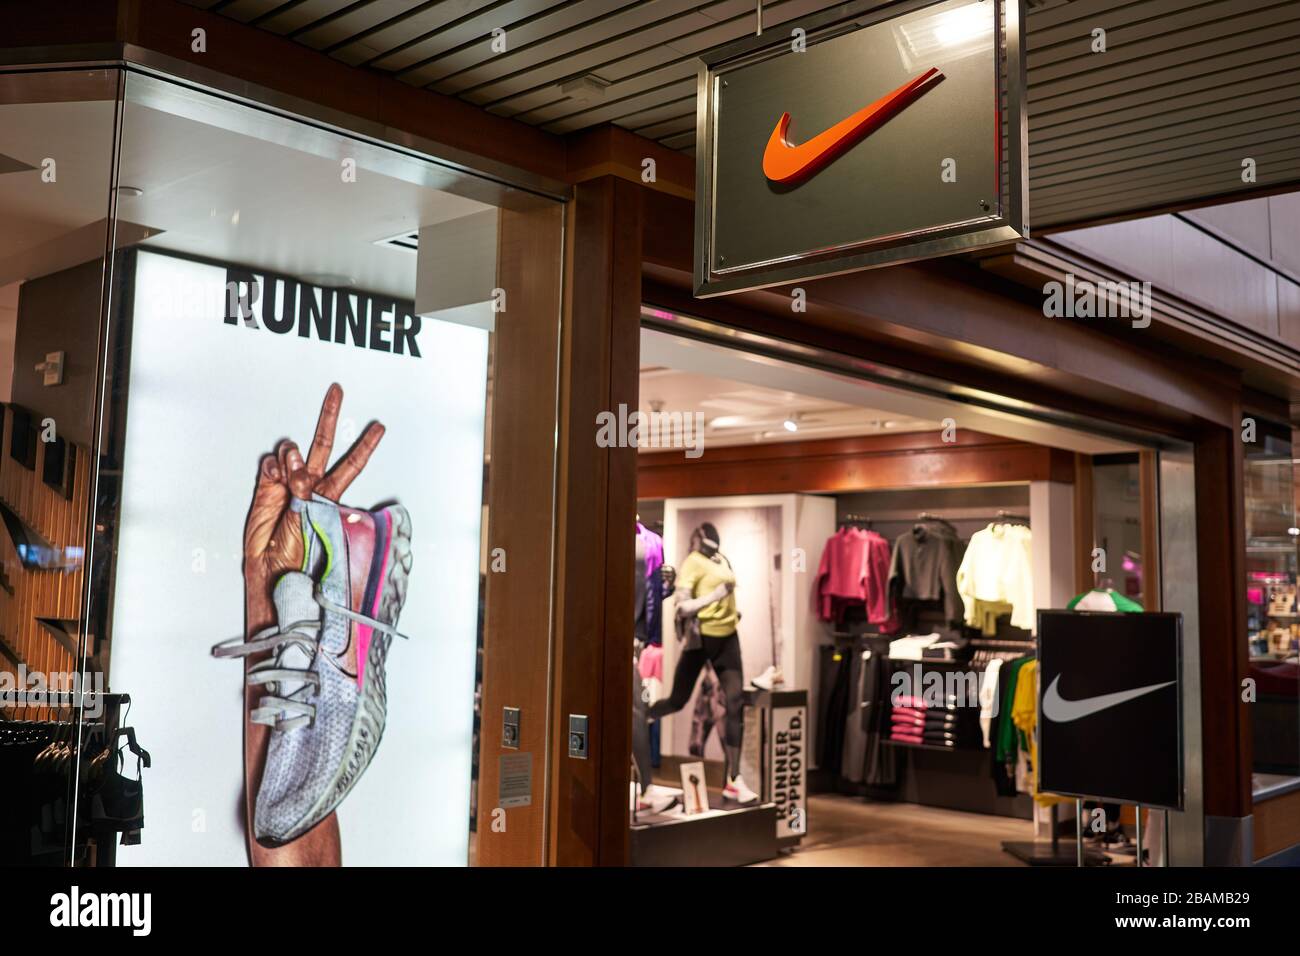 Nike Shop Window High Resolution Stock Photography and Images - Alamy